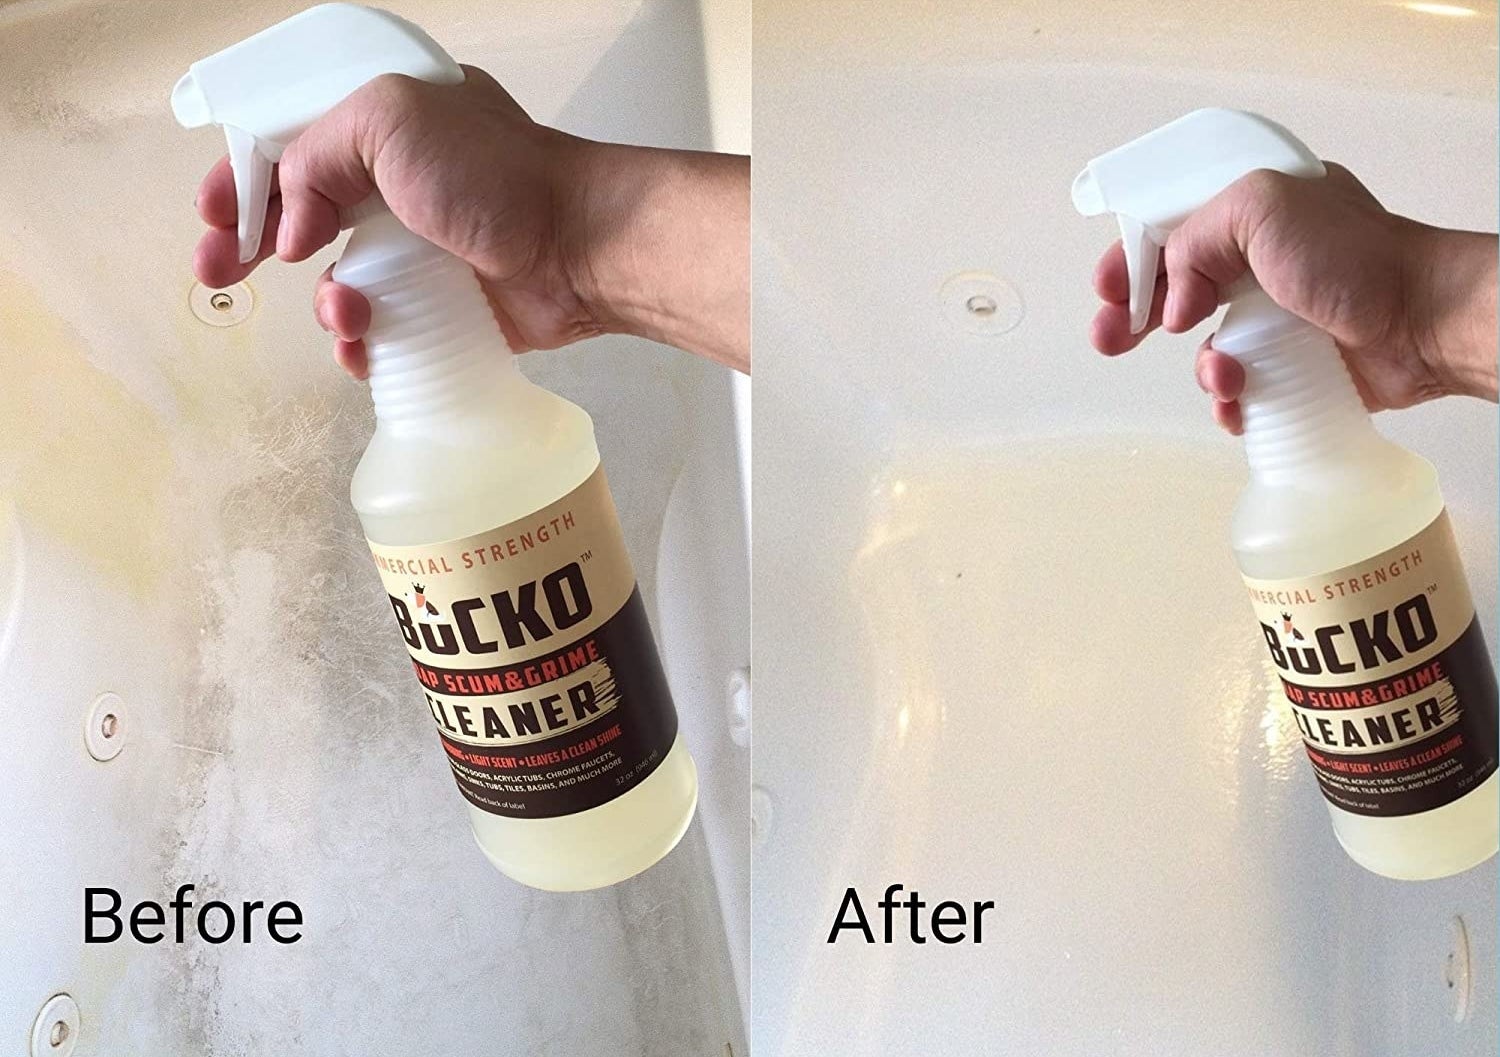 A before an after photo with a hand spraying the product on a soap scum-filled tub on one side, and then the tub completely clean on the other